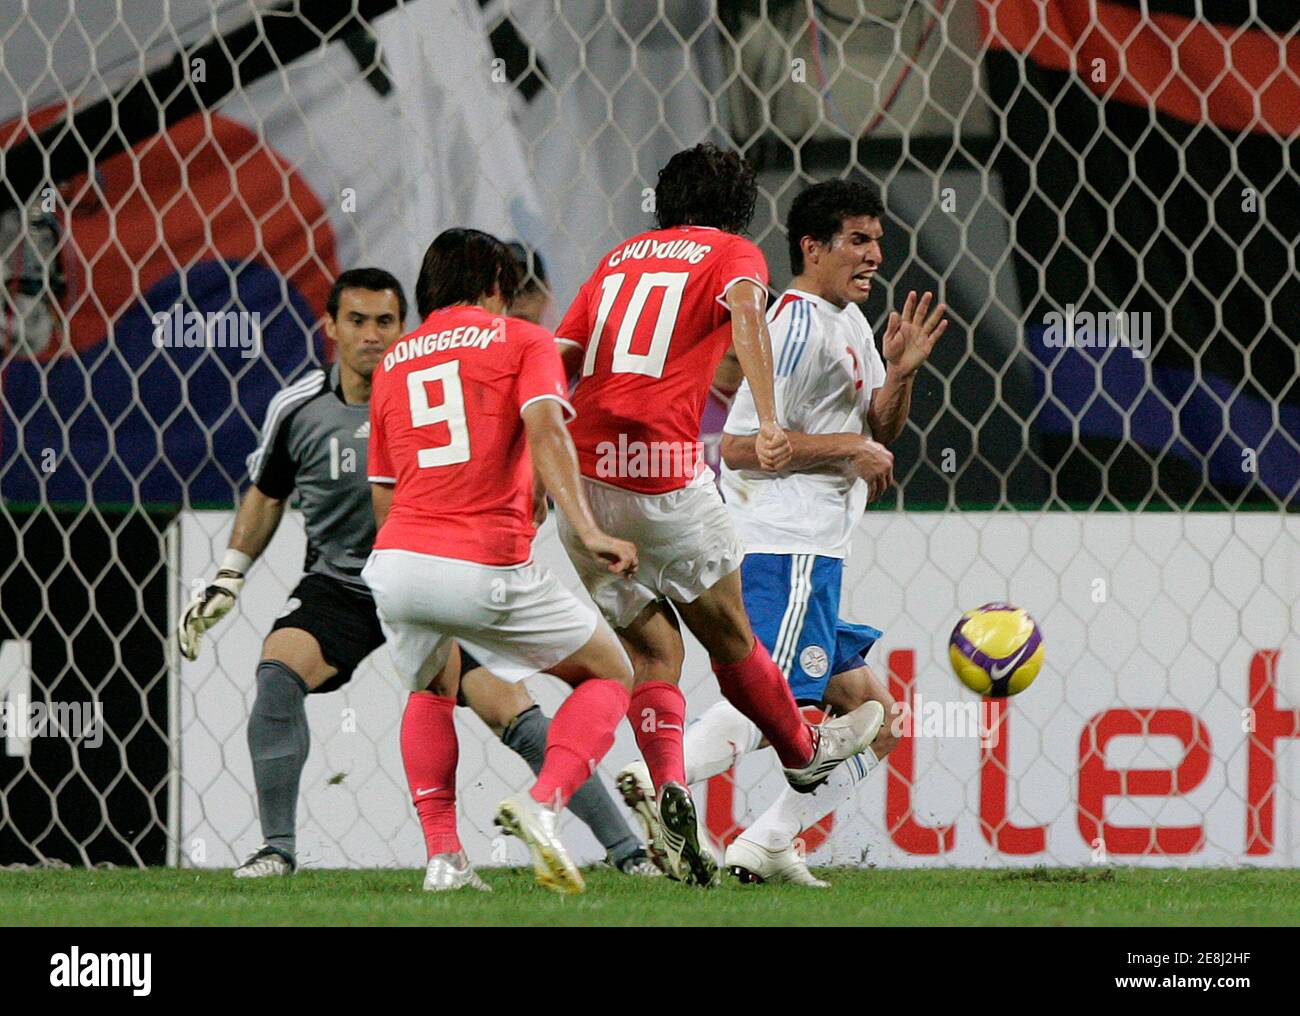 South Korea's Park Chu-Young (10) kicks to score a goal beside his teammate Cho Dong-gun (9) as Paraguay's Marcos Caceres (1st R) tries to block during their friendly soccer match at the Seoul World Cup stadium August 12, 2009.  REUTERS/Jo Yong-Hak (SOUTH KOREA SPORT SOCCER) Stock Photo